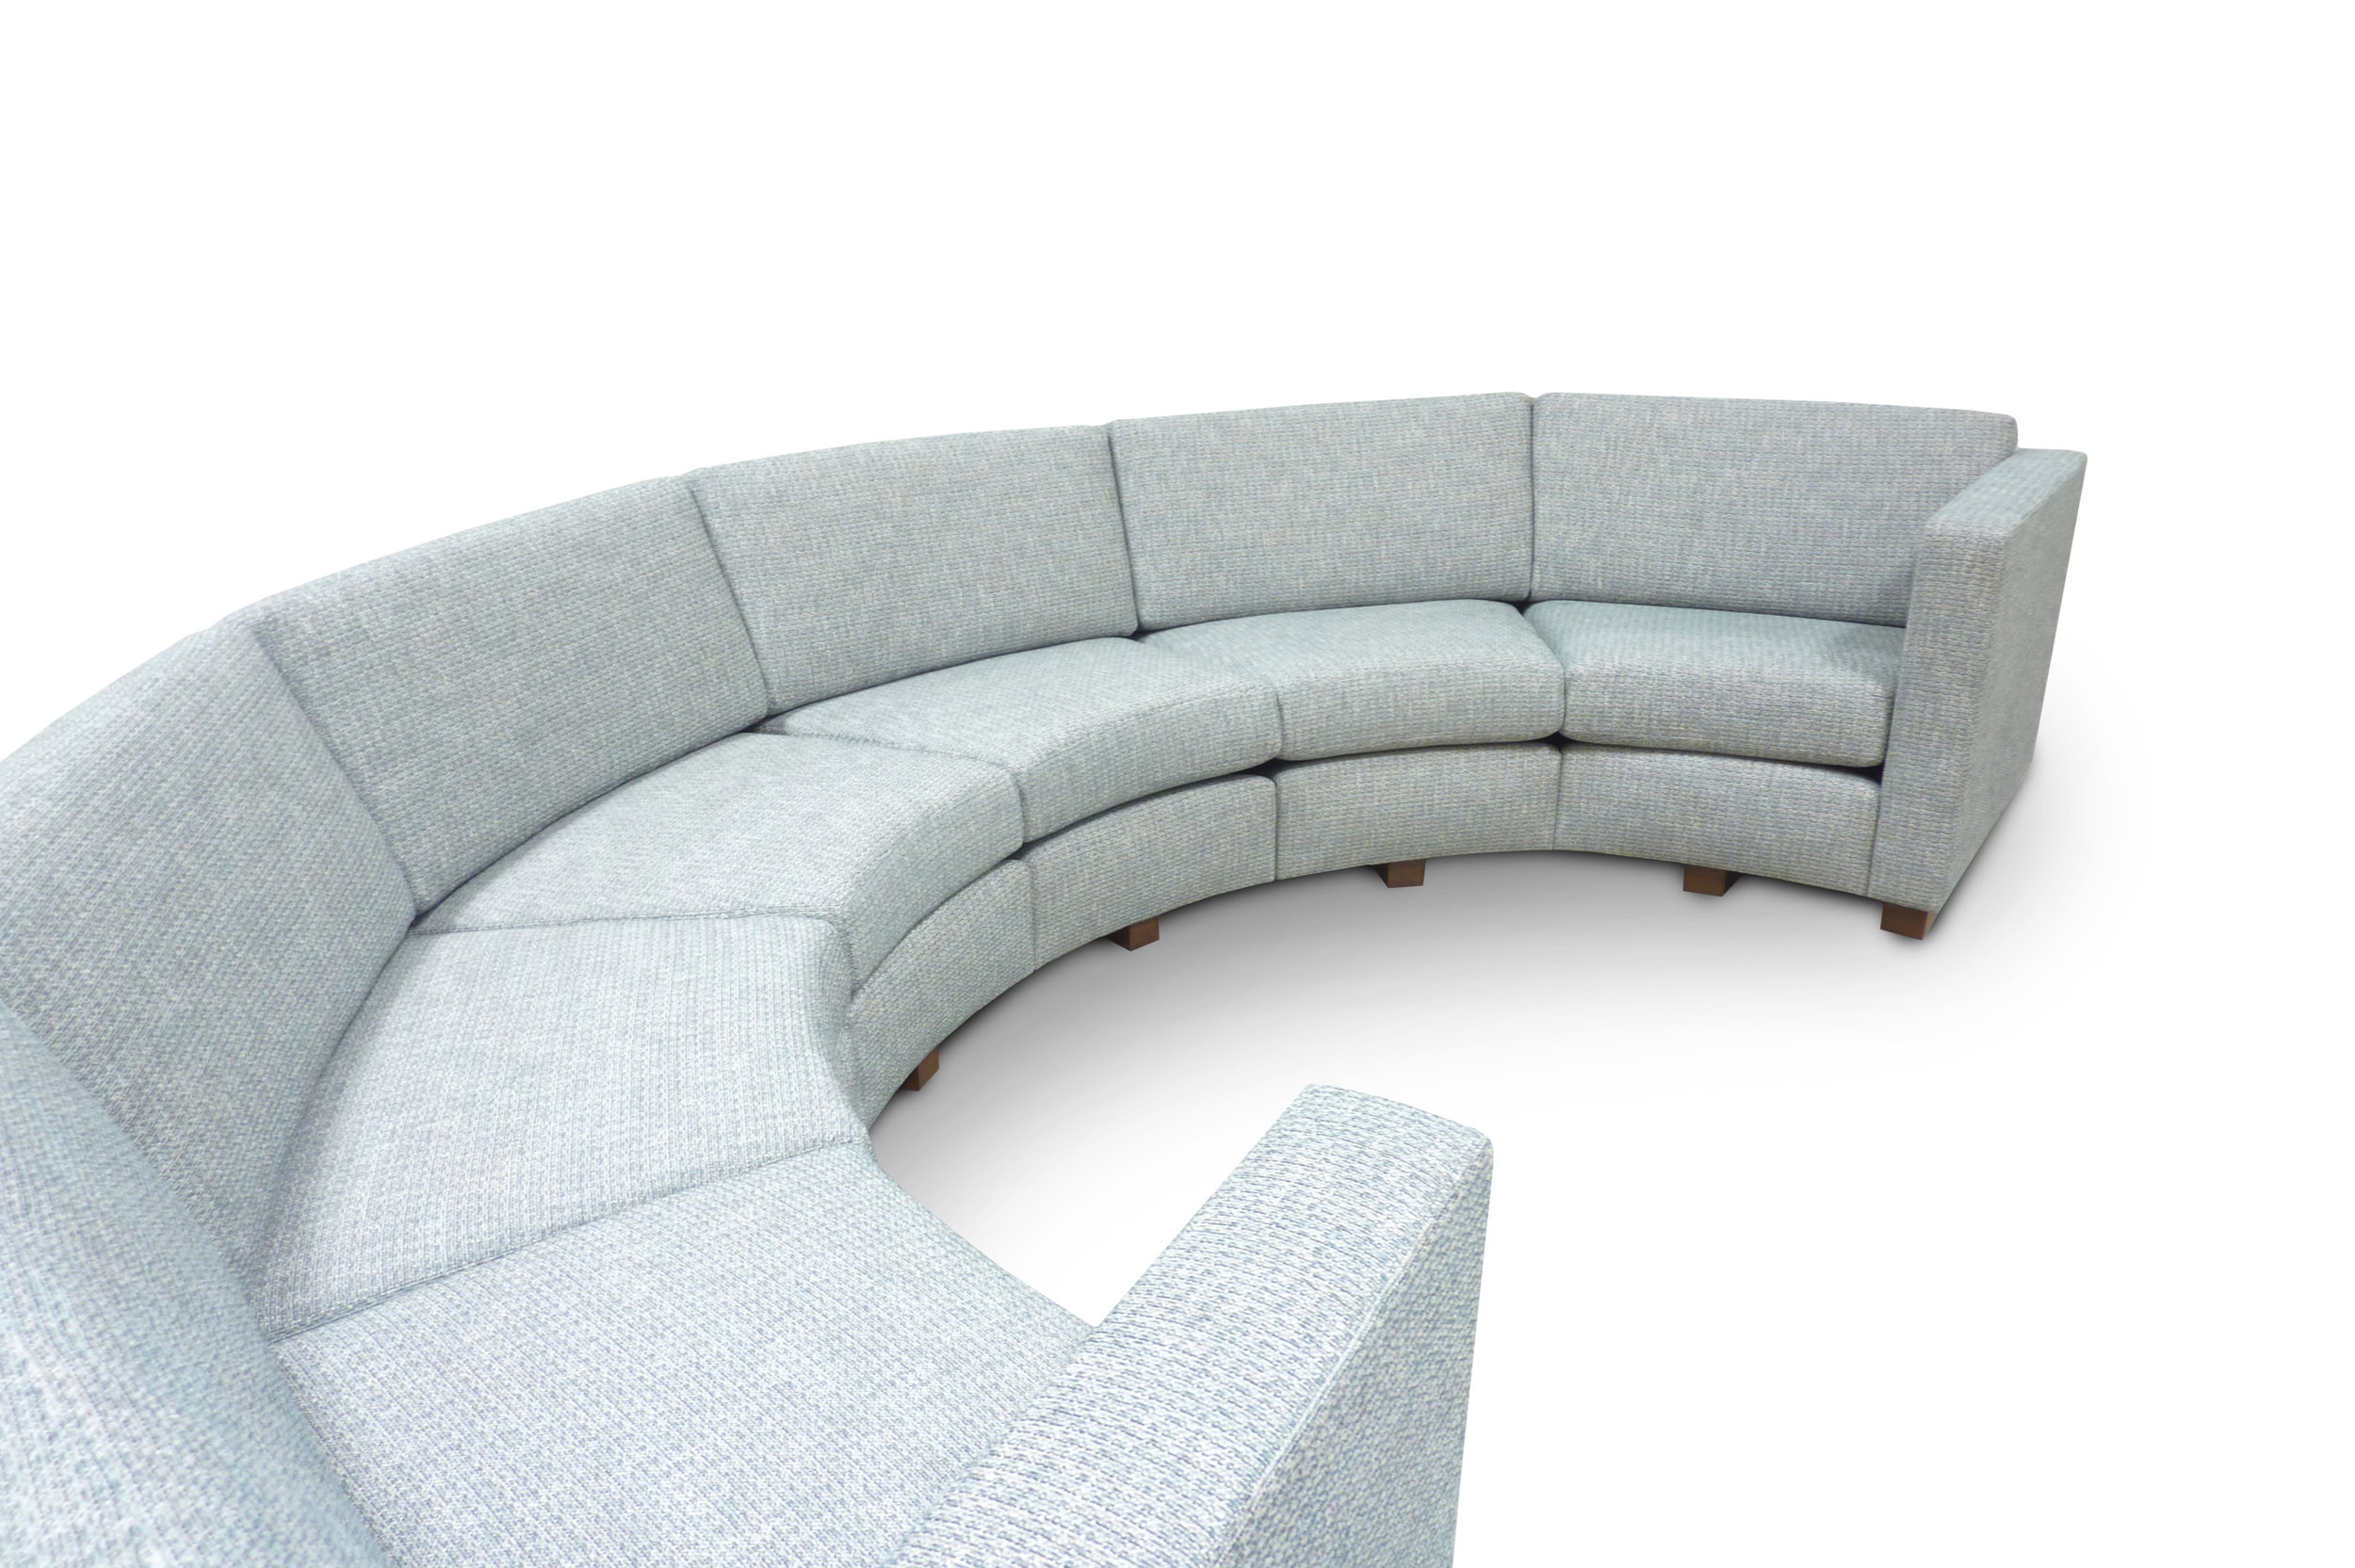   6-seat sofa sectional; Semi attached back; Loose seat cushions; plinth base  